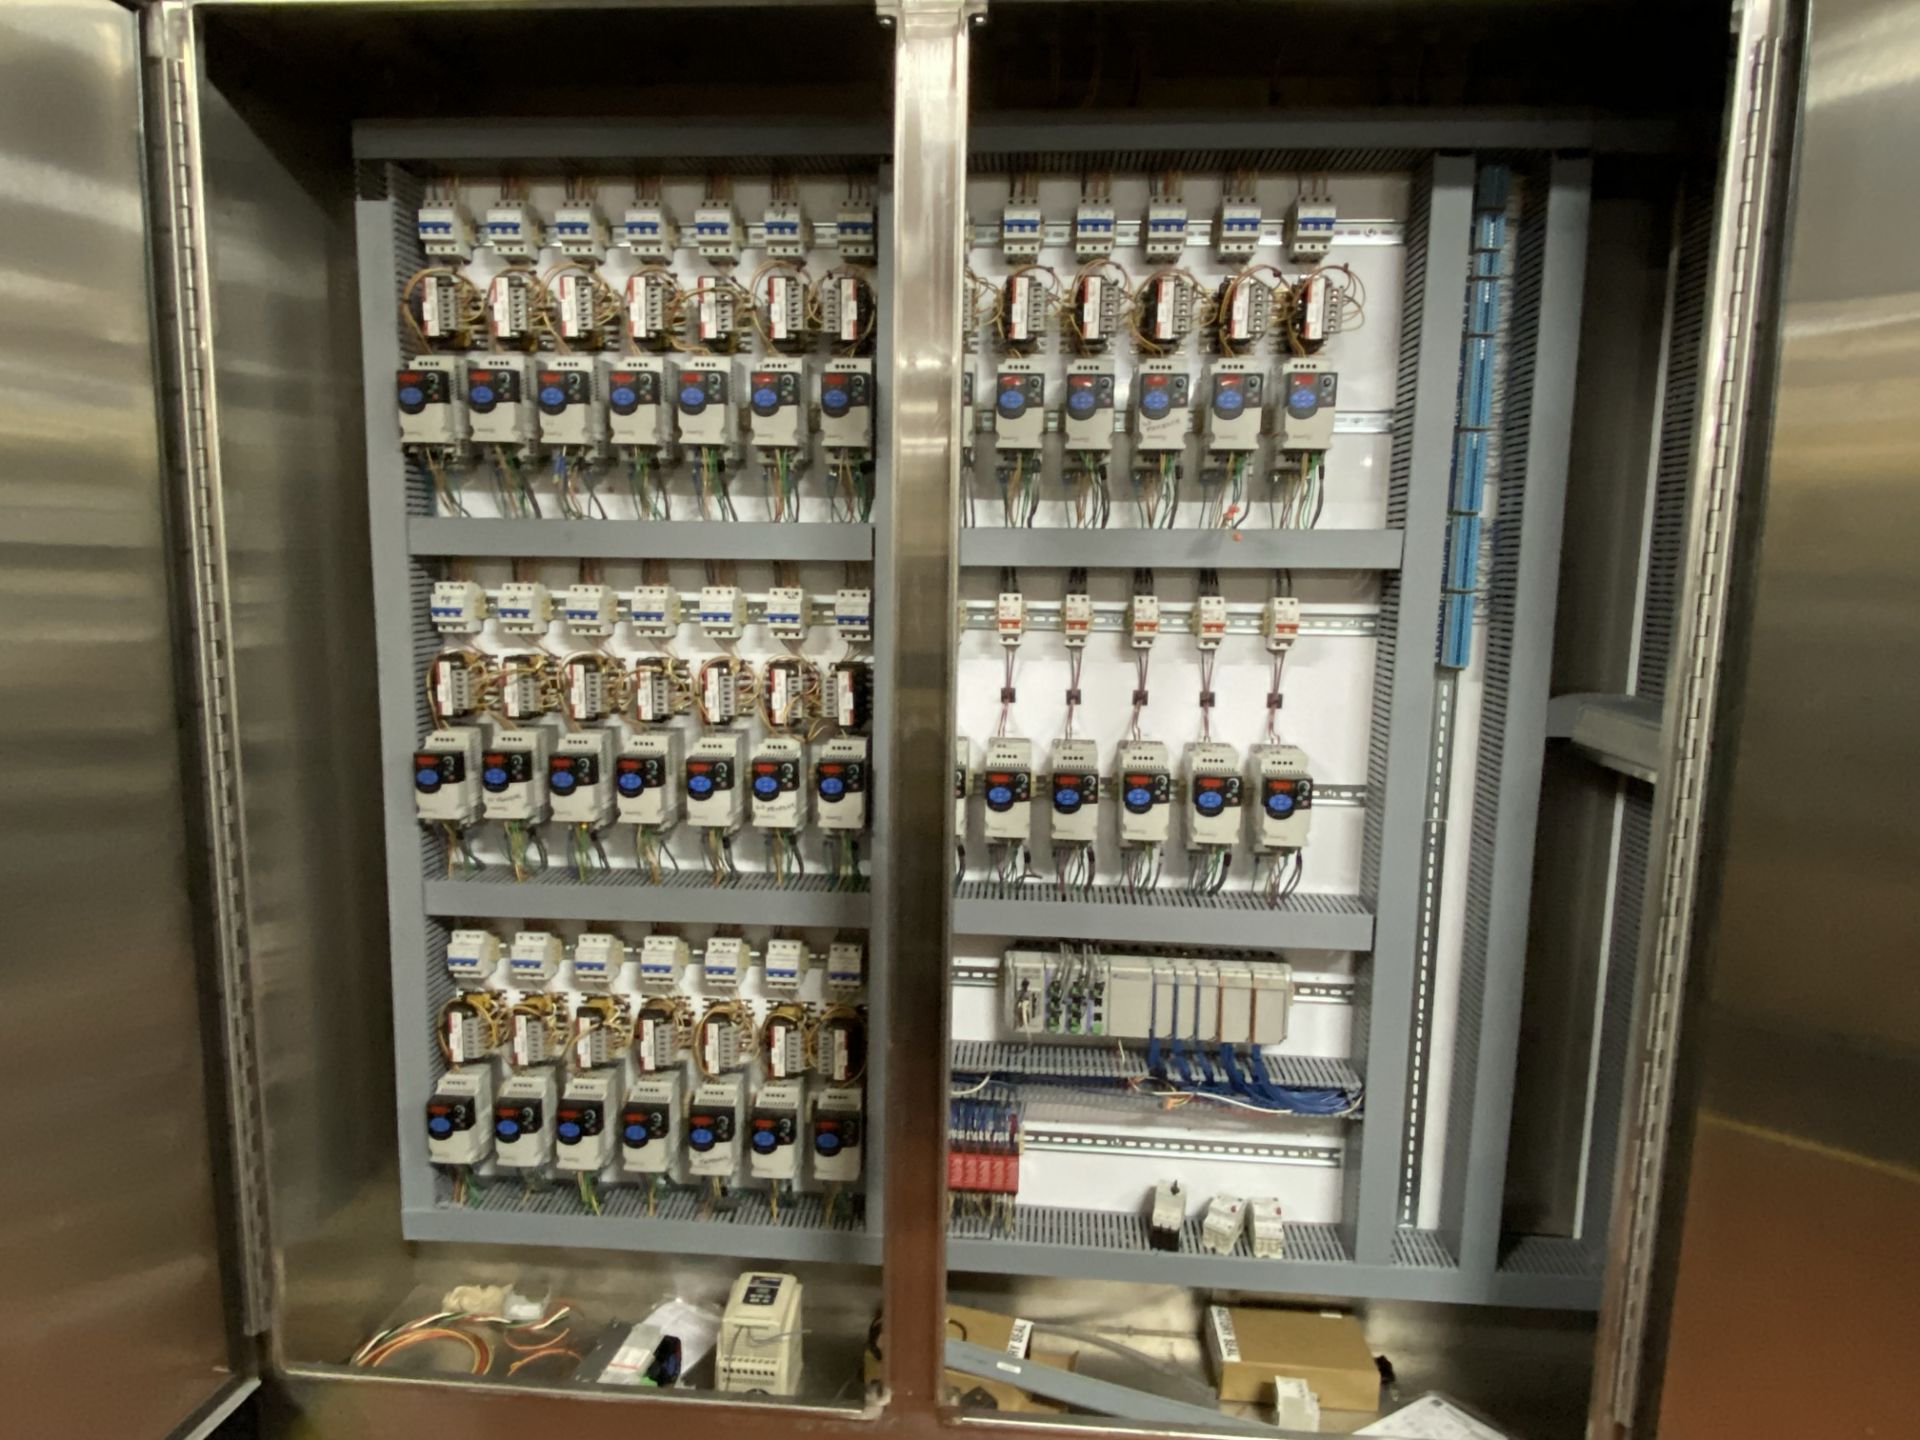 Stainless Steel Control Panel for Conveyor System, (33) Allen Bradley Powerflex V | Rig Fee: $850 - Image 2 of 2